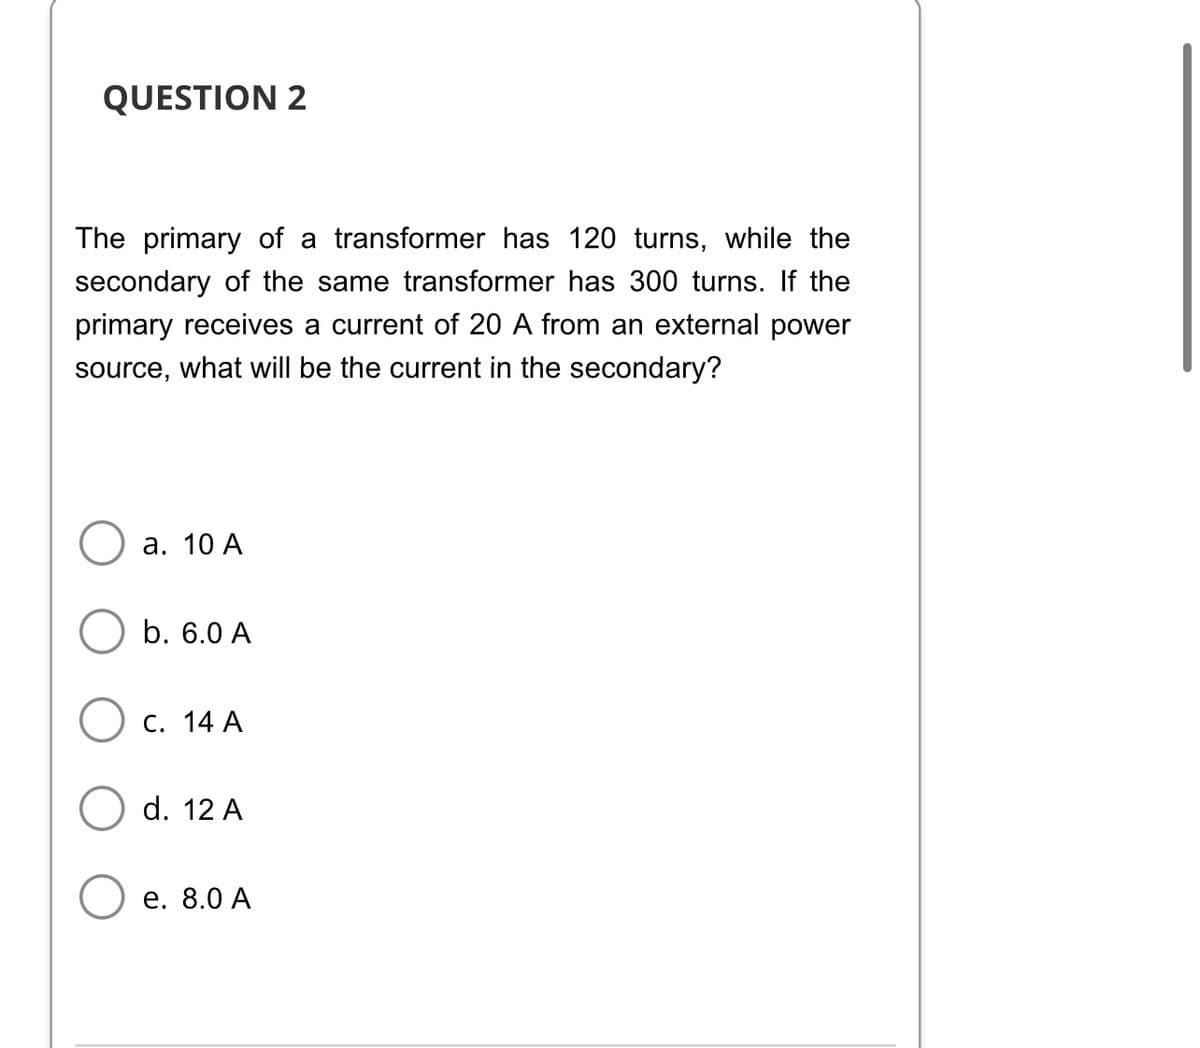 QUESTION 2
The primary of a transformer has 120 turns, while the
secondary of the same transformer has 300 turns. If the
primary receives a current of 20 A from an external power
source, what will be the current in the secondary?
a. 10 A
b. 6.0 A
C. 14 A
d. 12 A
e. 8.0 A